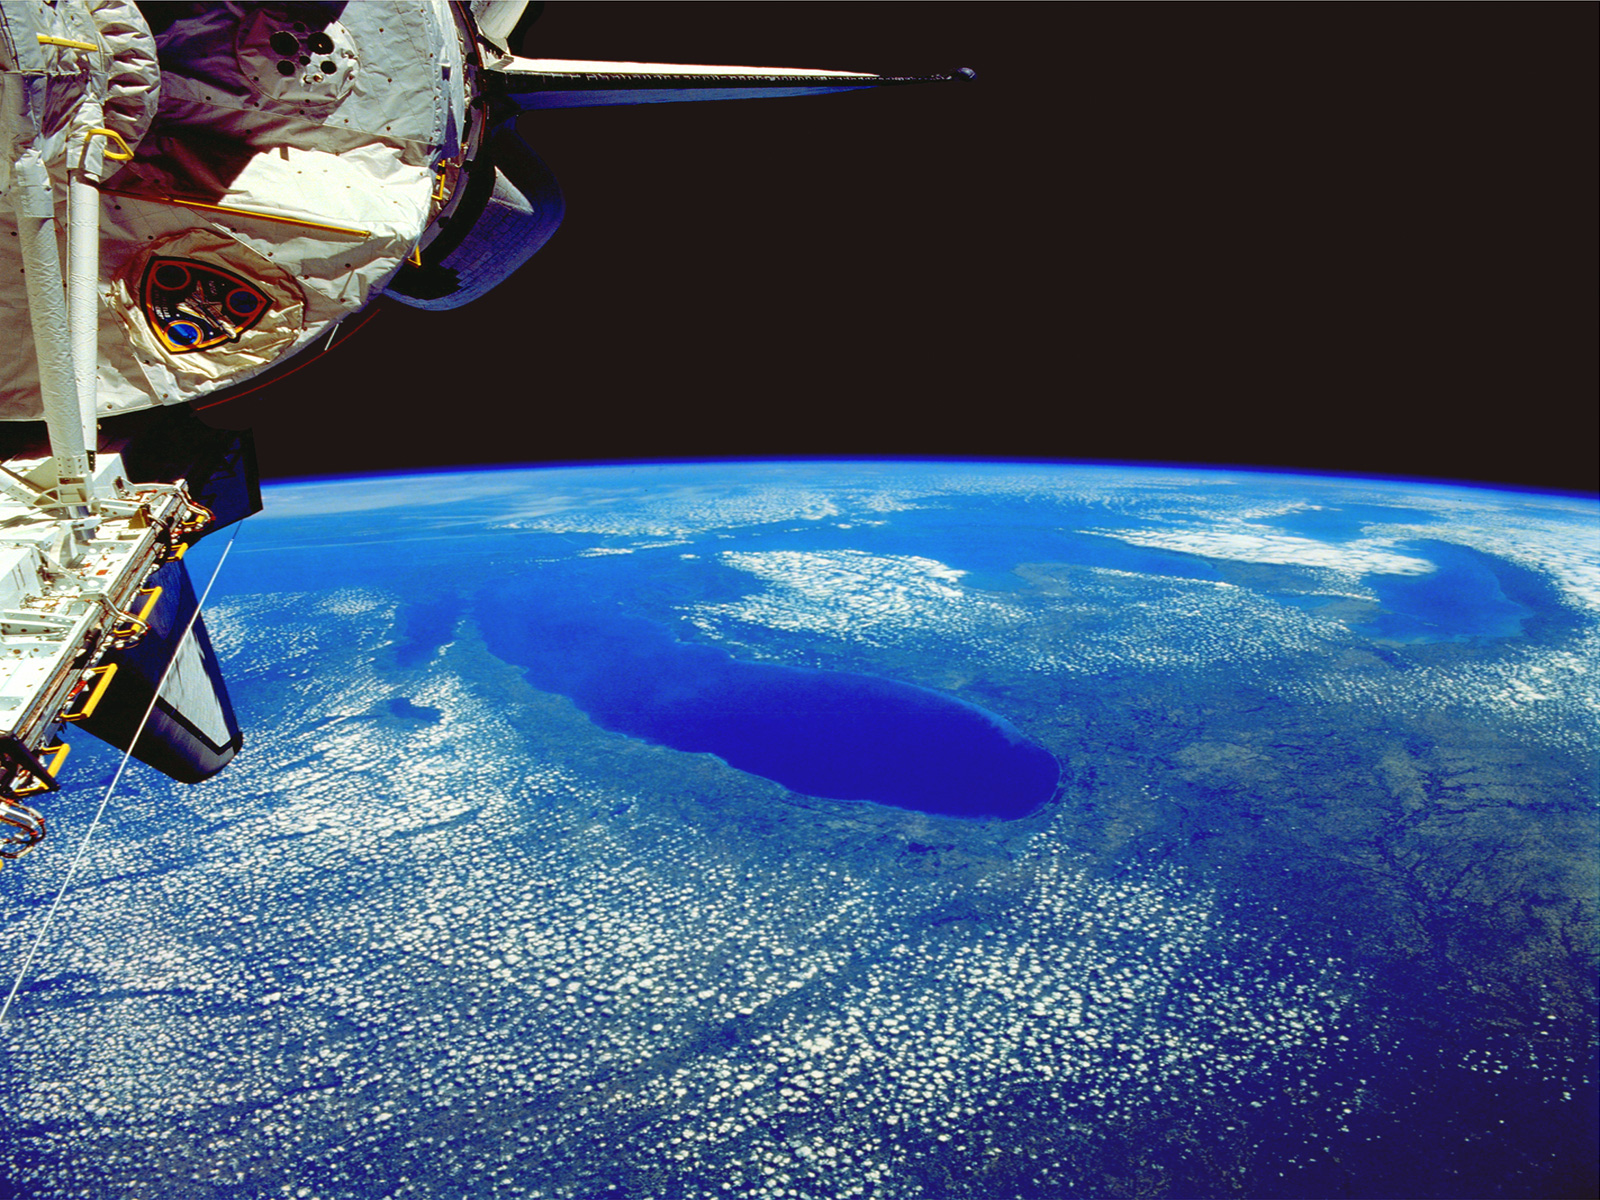 HD desktop wallpaper featuring the Earth viewed from space.